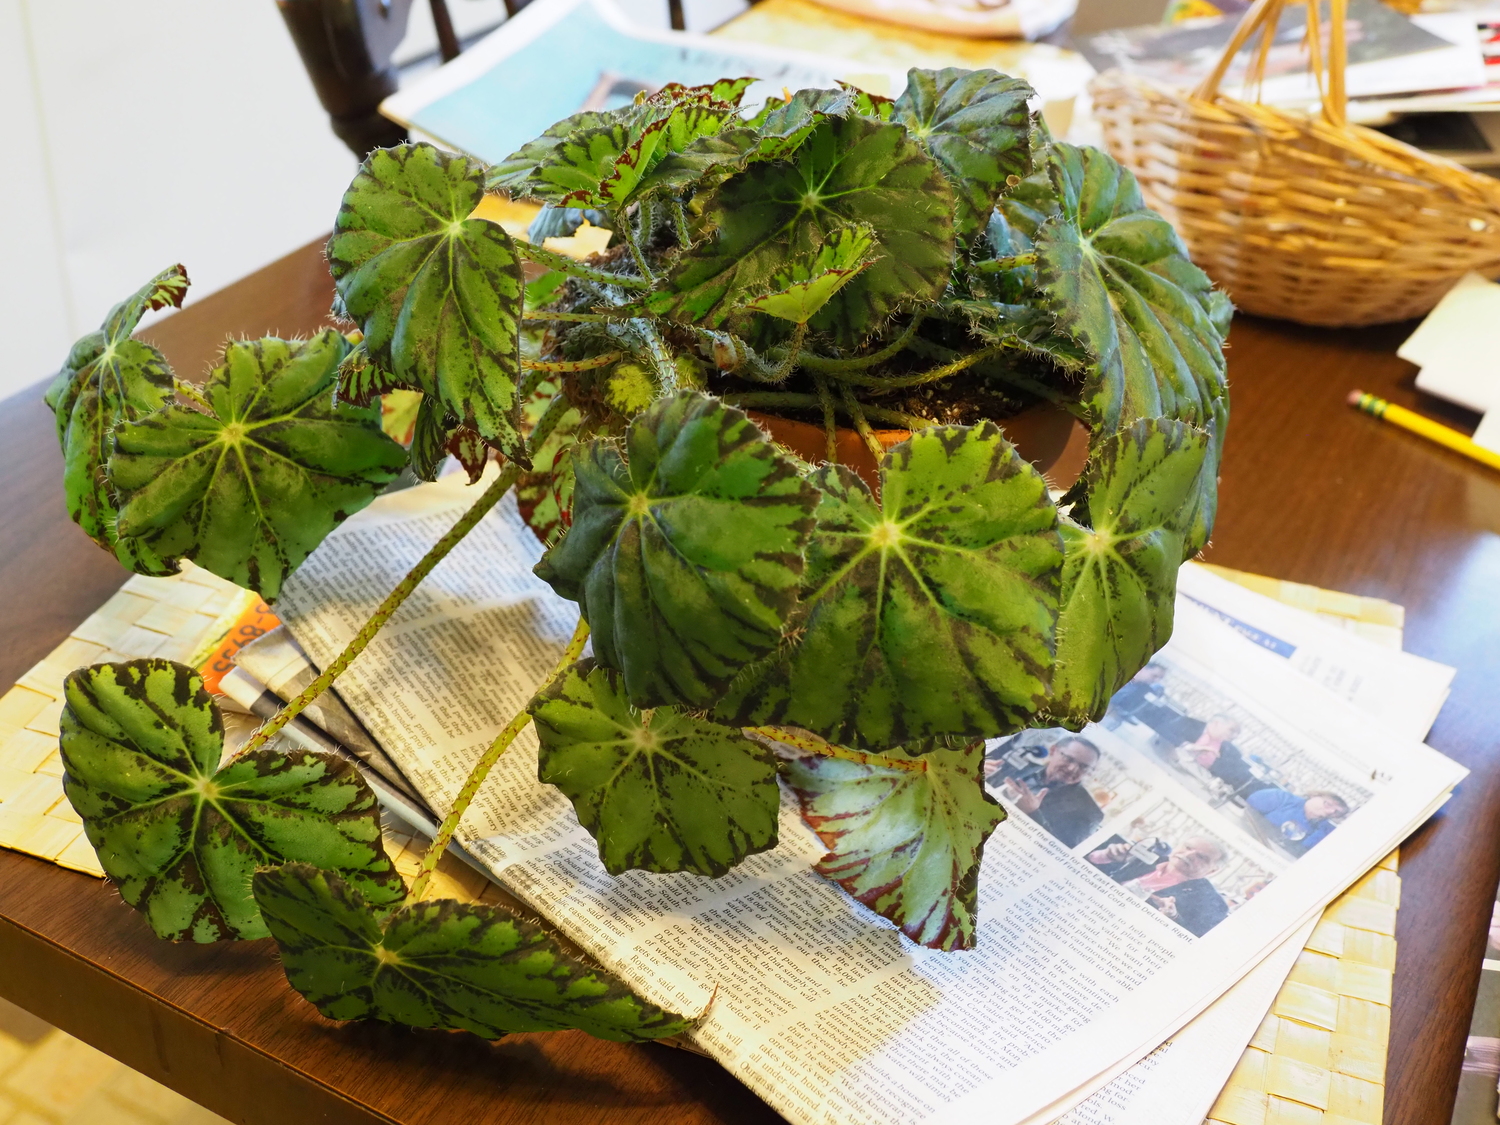 Repotted and watered, this 2-year-old Begonia is set to go for another two years in its larger home. At that point it will probably be propagated again with a leaf cut to keep the plant thriving since it will need rejuvenation.   ANDREW MESSINGER